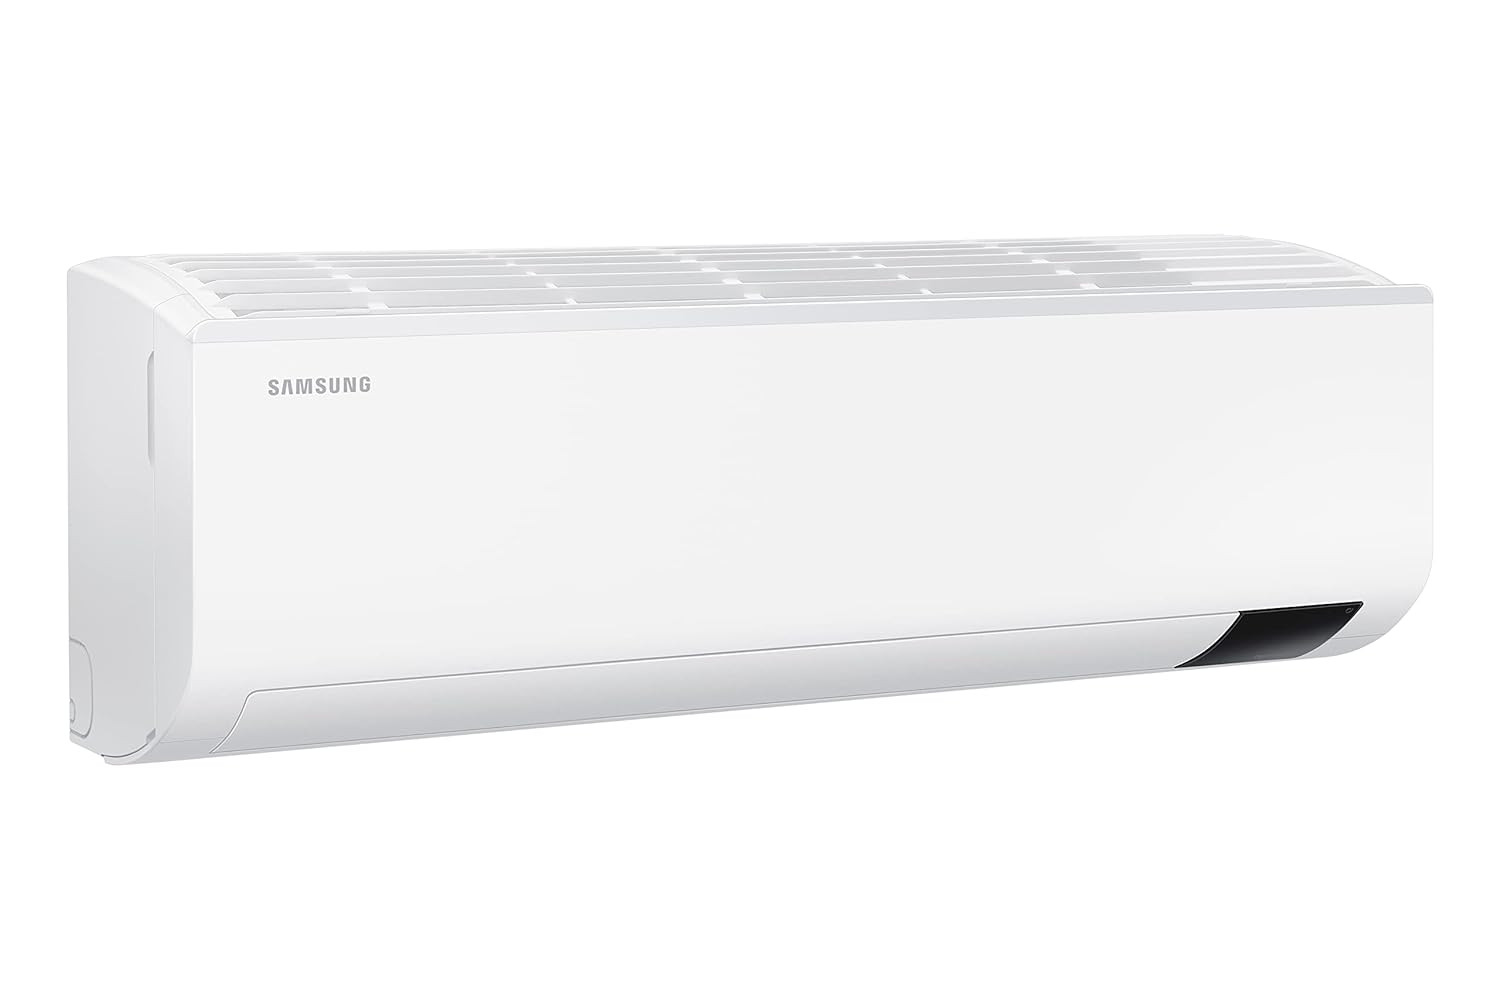 Samsung 15 Ton 3 Star Inverter Split AC Copper Convertible 5-in-1 Cooling Mode Easy Filter Plus